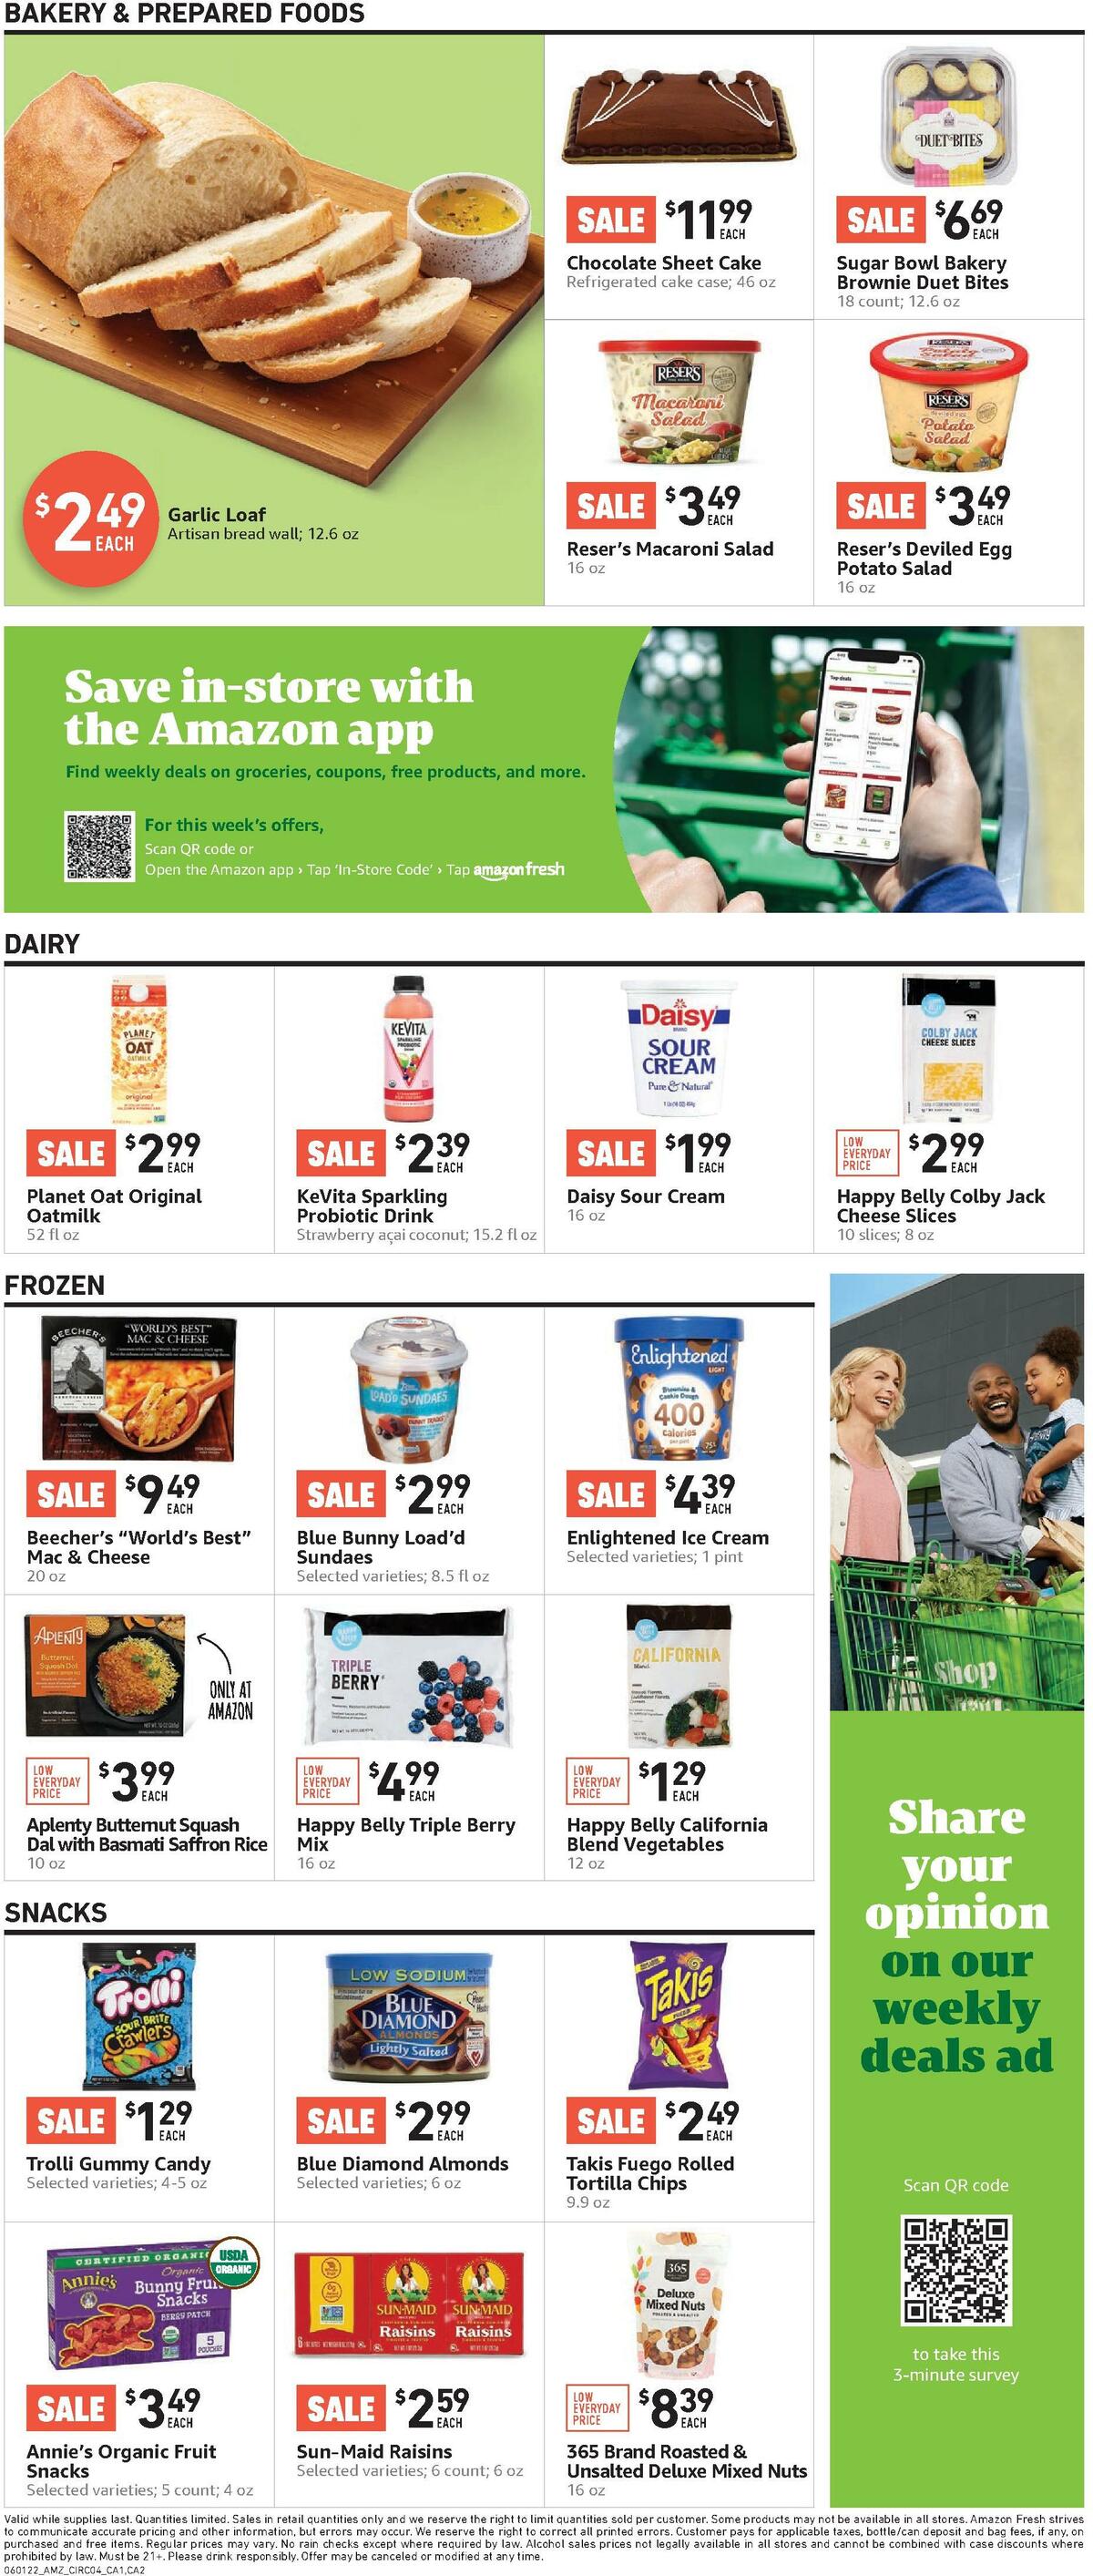 Amazon Fresh Weekly Ad from June 1